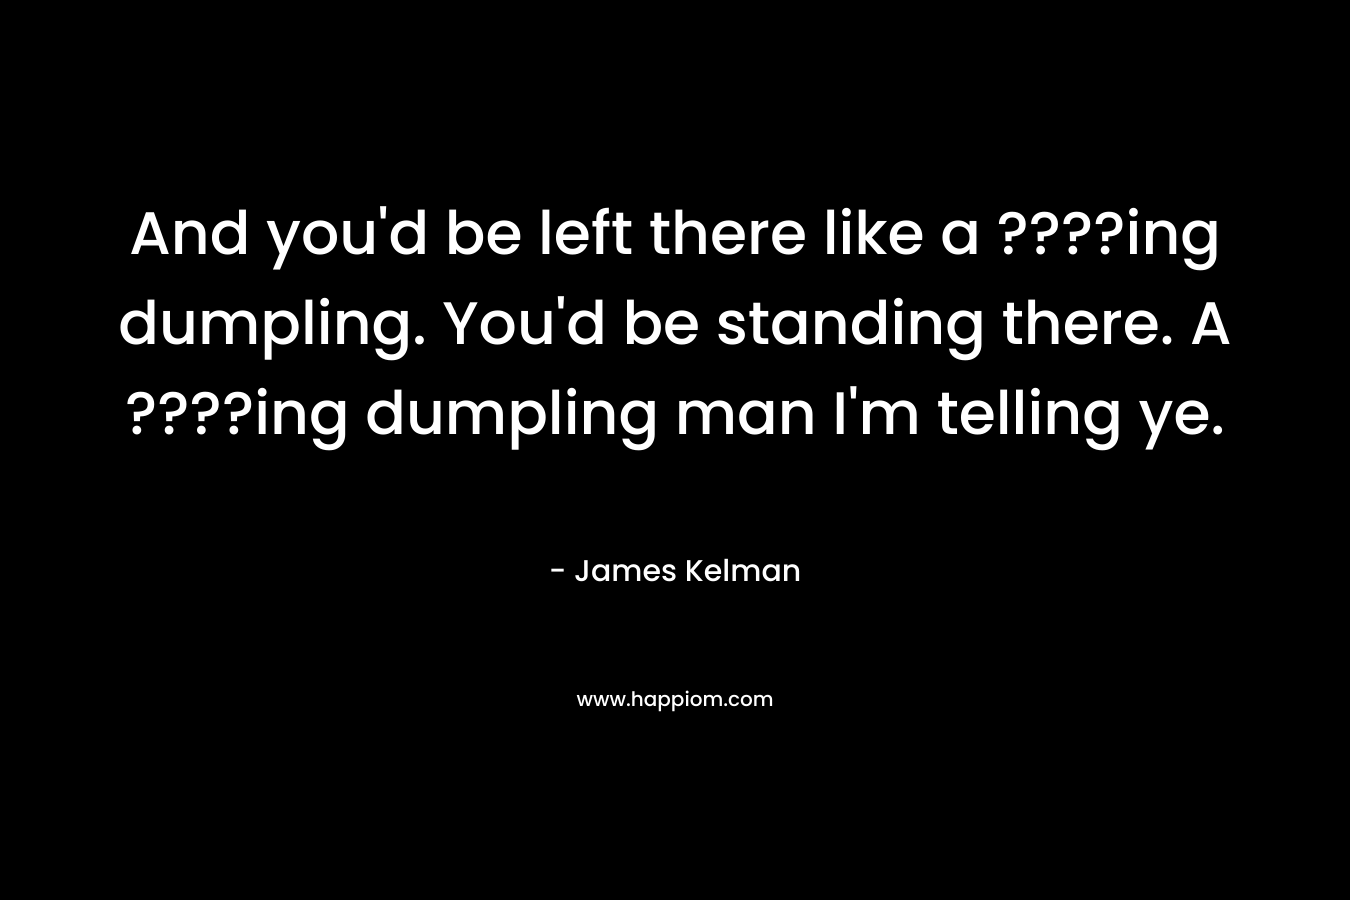 And you'd be left there like a ????ing dumpling. You'd be standing there. A ????ing dumpling man I'm telling ye.